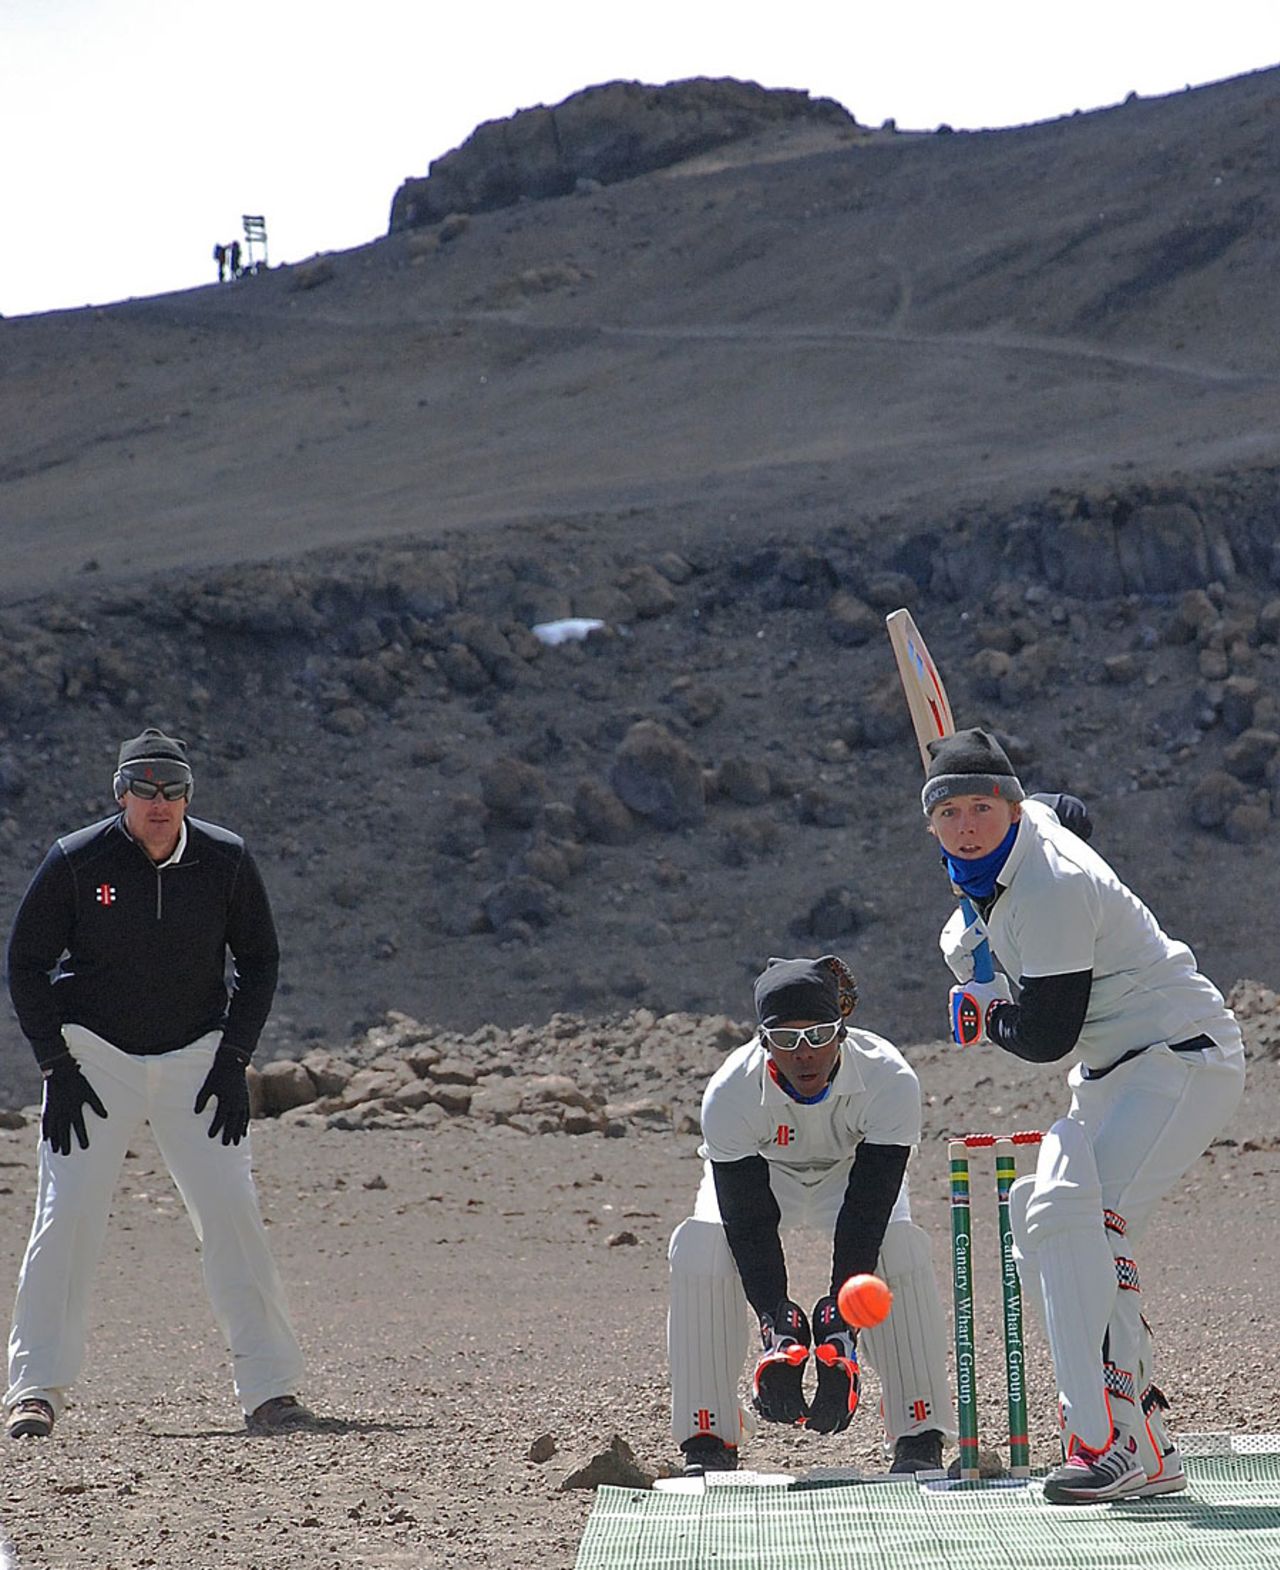 Heather Knight bats and Ashley Giles stands at slip during the cricket match on Kilimanjaro, Tanzania, September 26, 2014